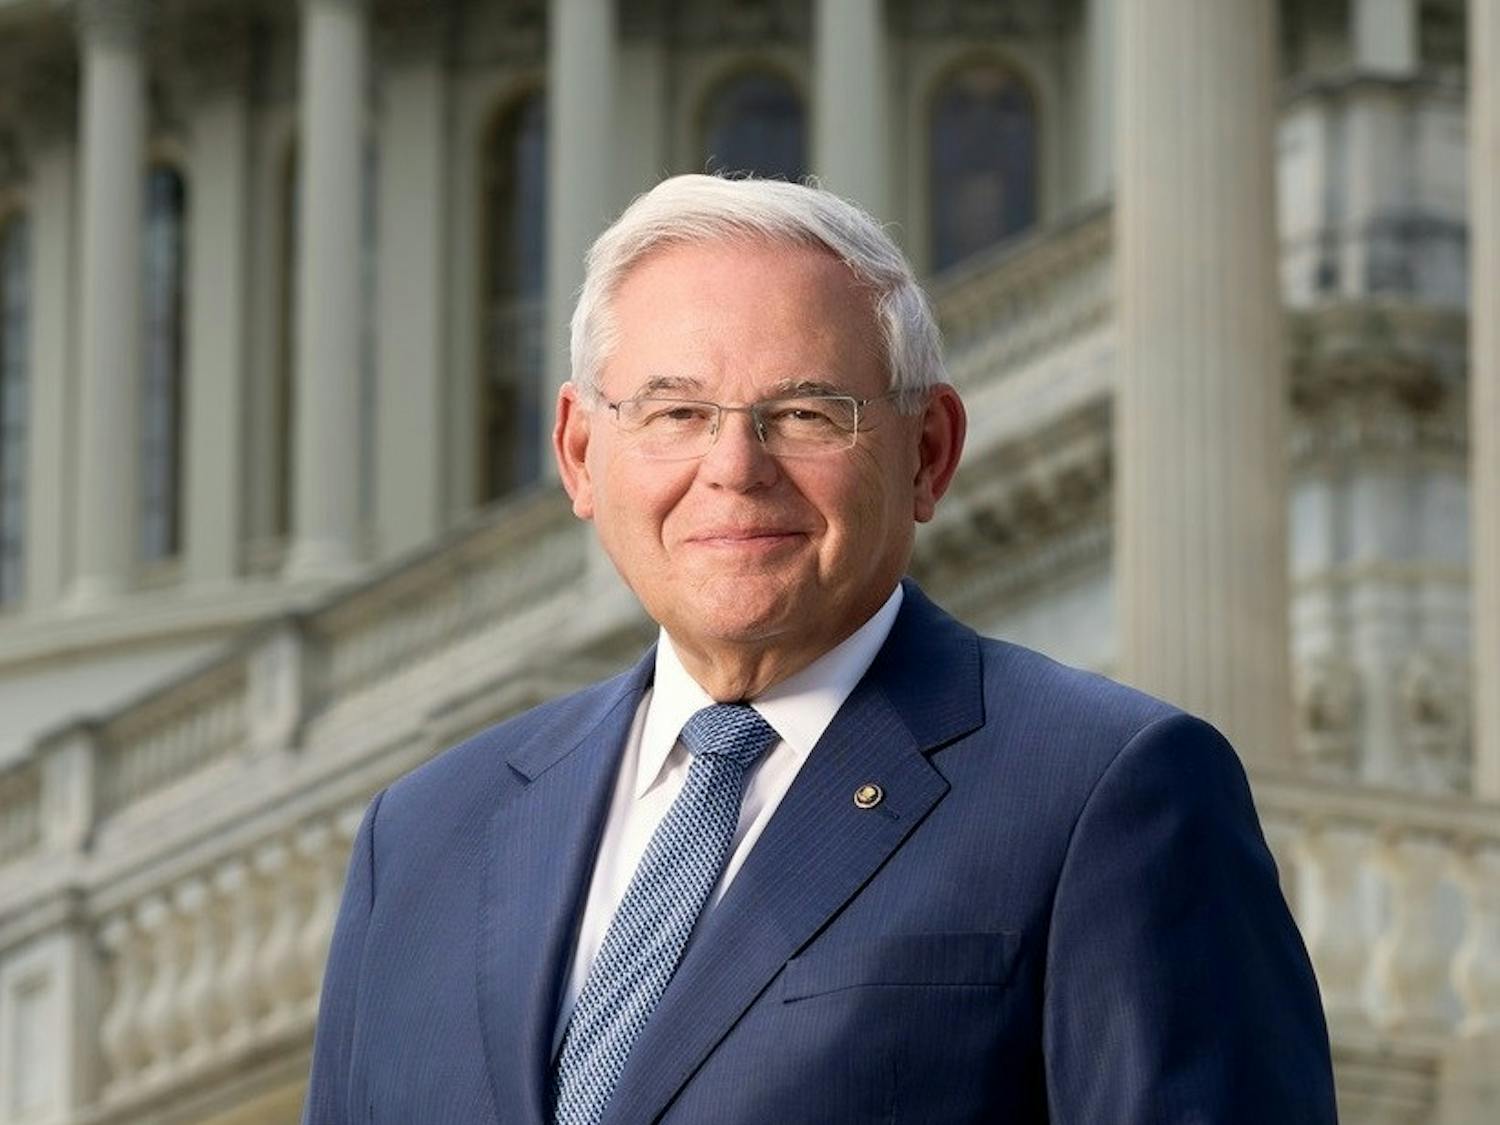 New Jersey Sen. Bob Menendez and his wife, Nadine, were charged with bribery as a result of accepting hundreds of thousands of cash and gold bars in exchange for power (Photo courtesy of Wikimedia Commons / “Senator Bob Menendez (2022)” by United States Senate. April 11, 2022). 